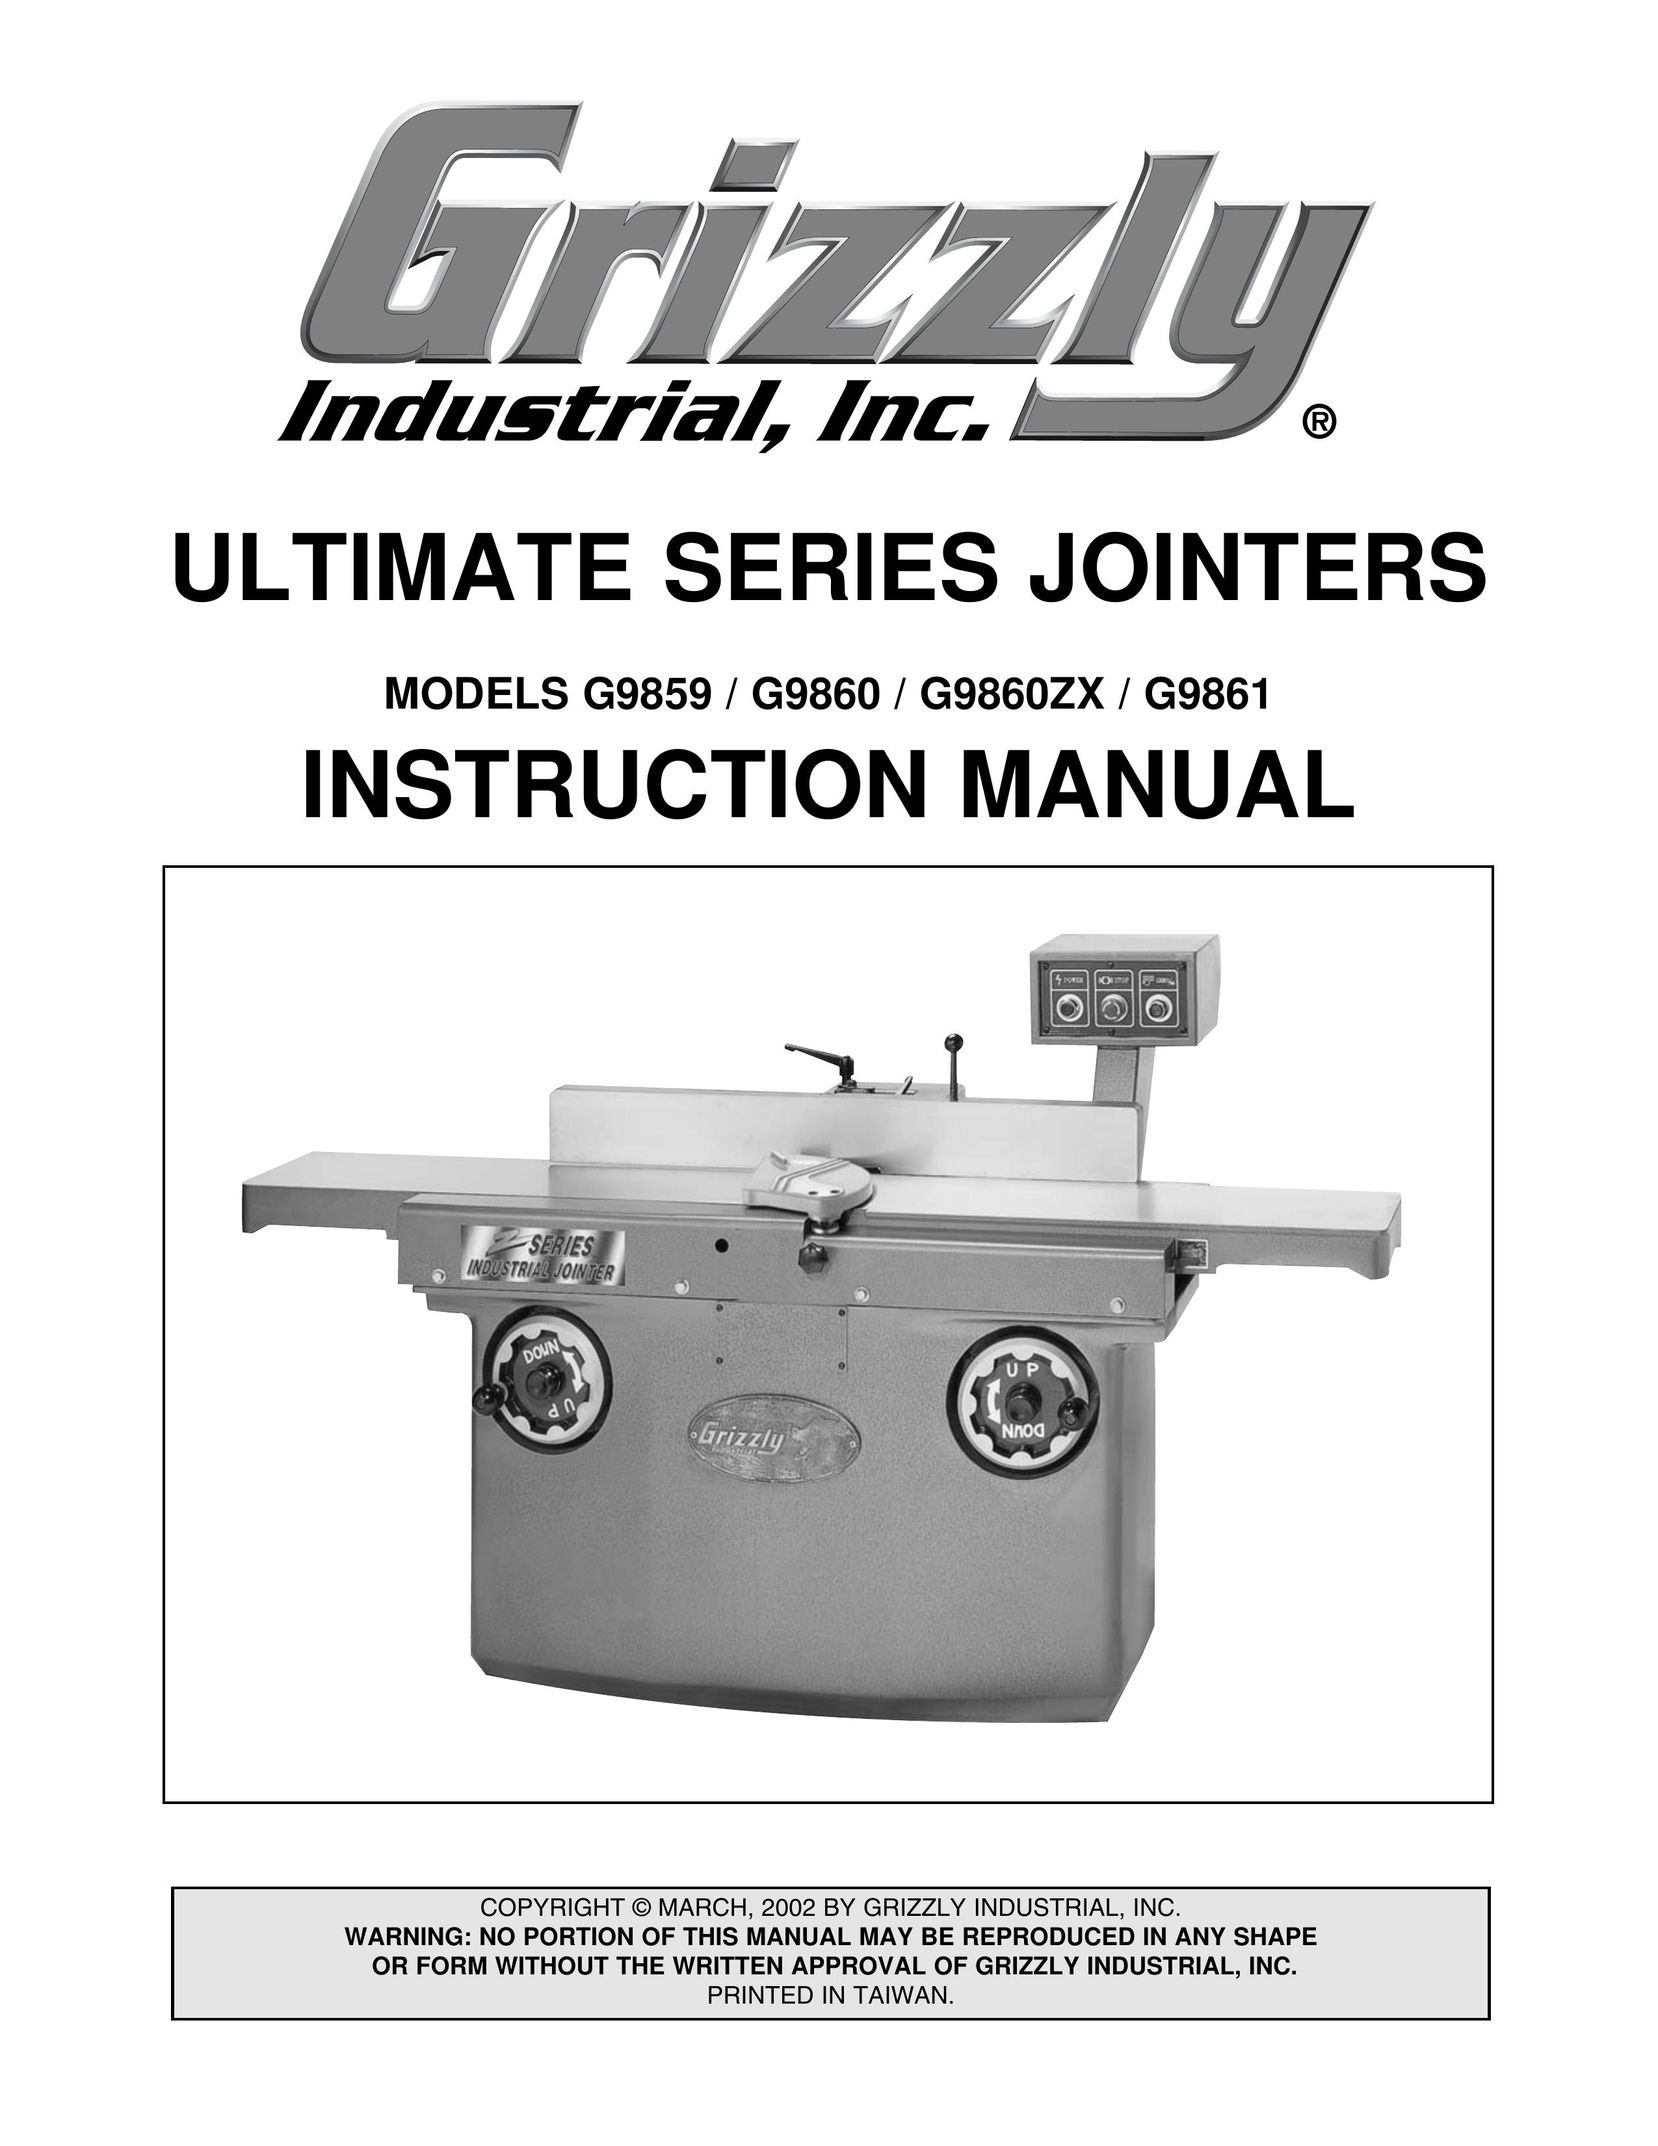 Grizzly G9861 Biscuit Joiner User Manual